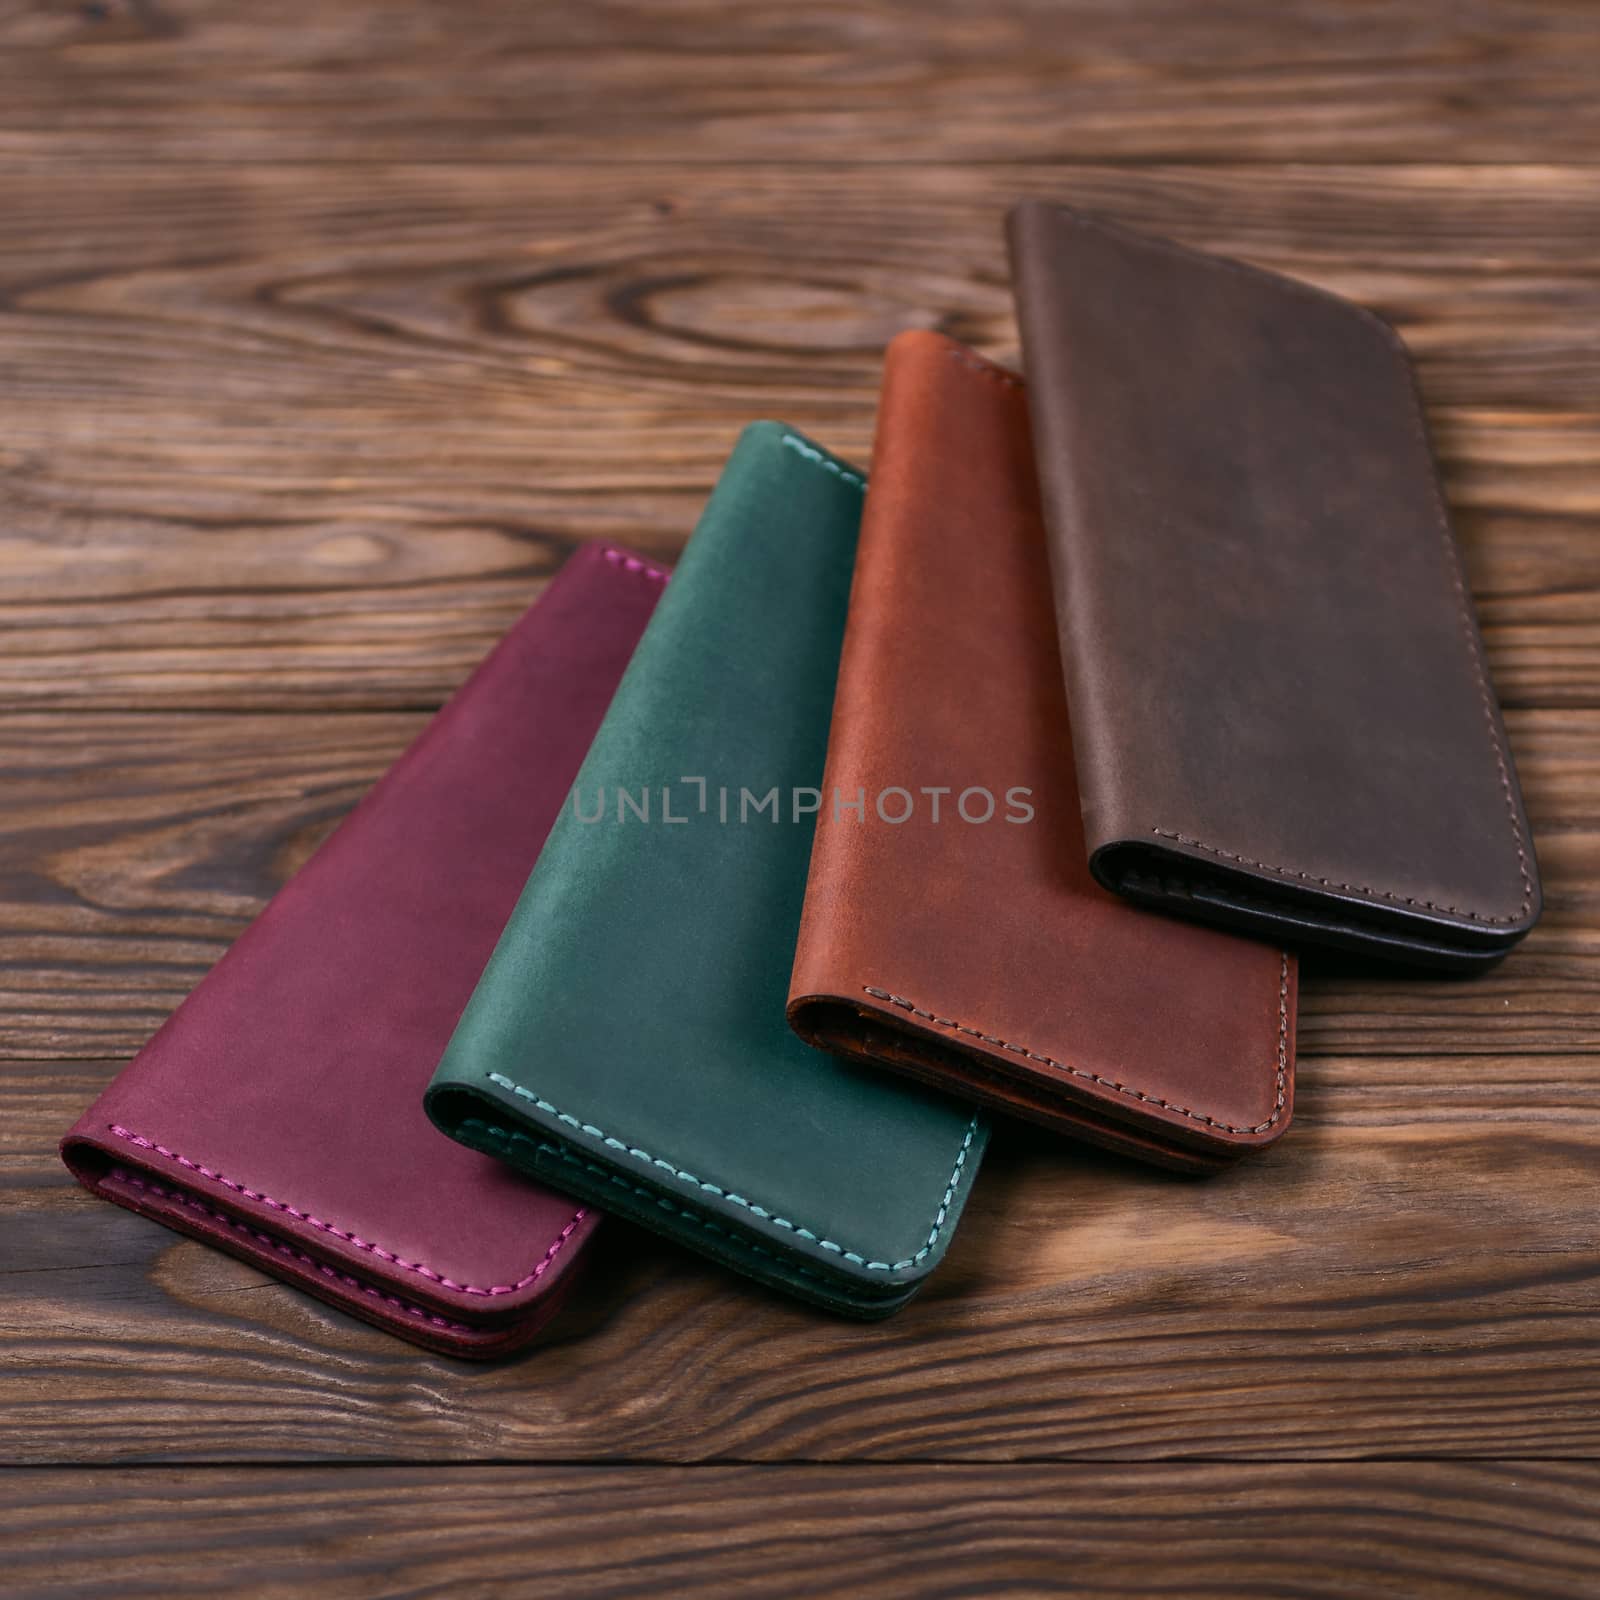 Four handmade leather porte-monnaie on wooden textured background. Side view. Stock photo of luxury accessories.